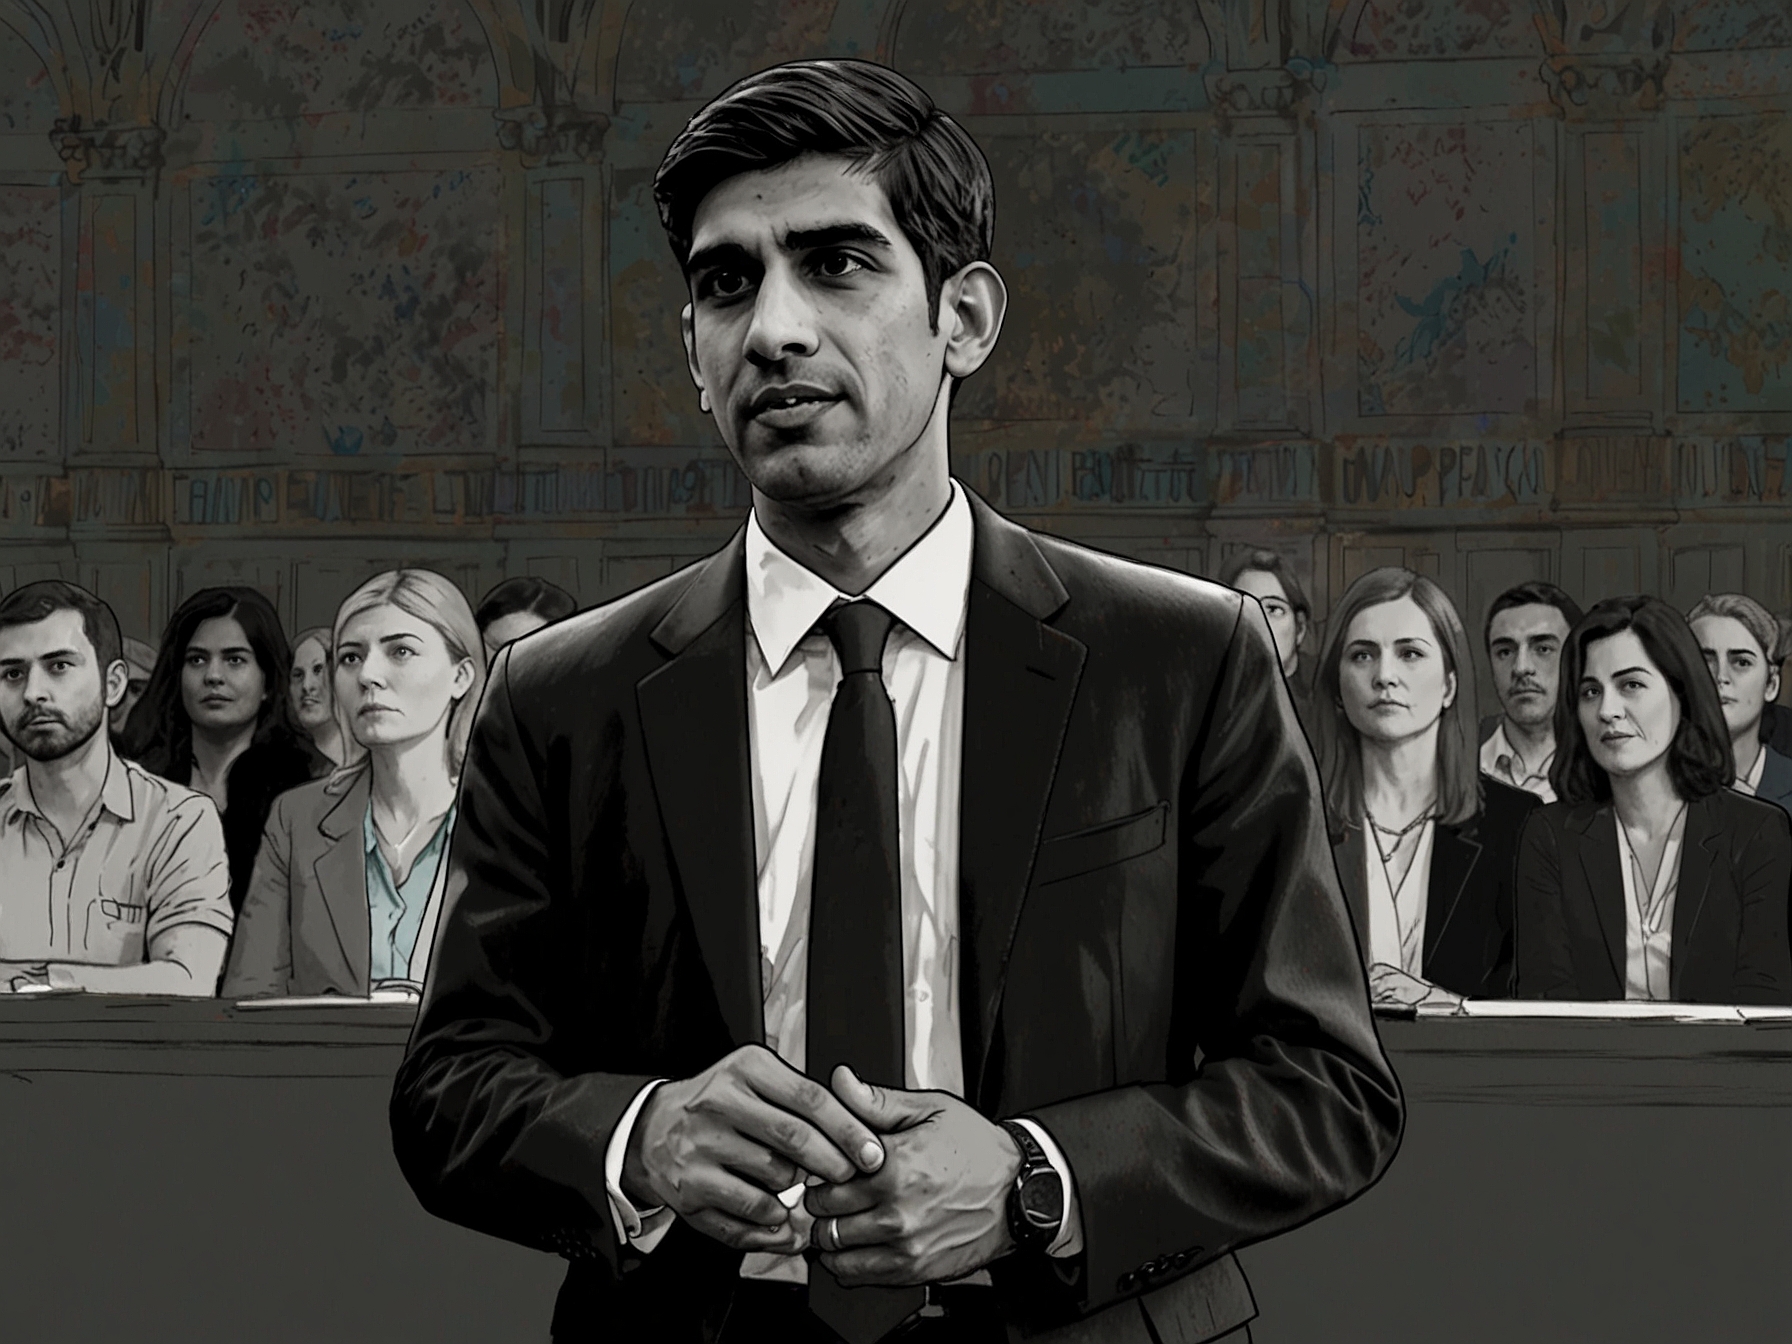 Prime Minister Rishi Sunak speaking during the BBC's Question Time, with audience members visibly reacting, some showing disapproval. Sunak addresses the balance between national security and human rights.